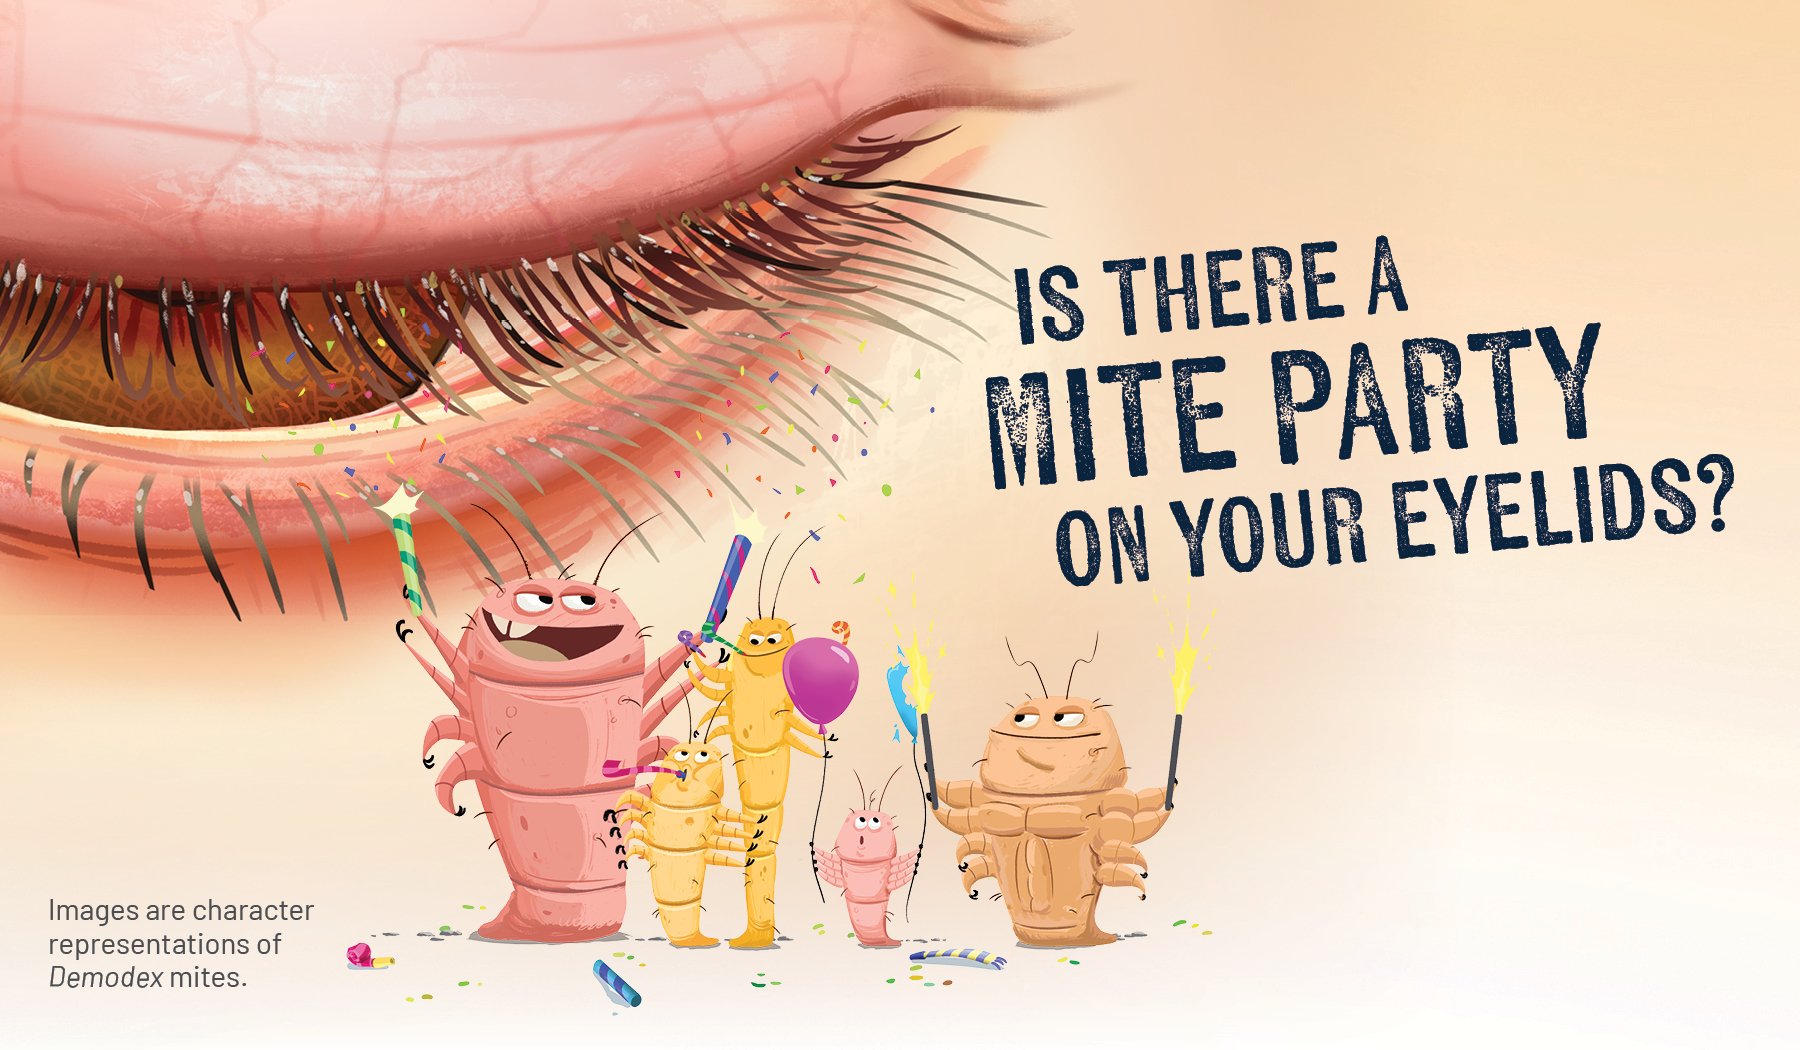 Tarsus launches a 'Mite Party' for new Xdemvy marketing campaign 